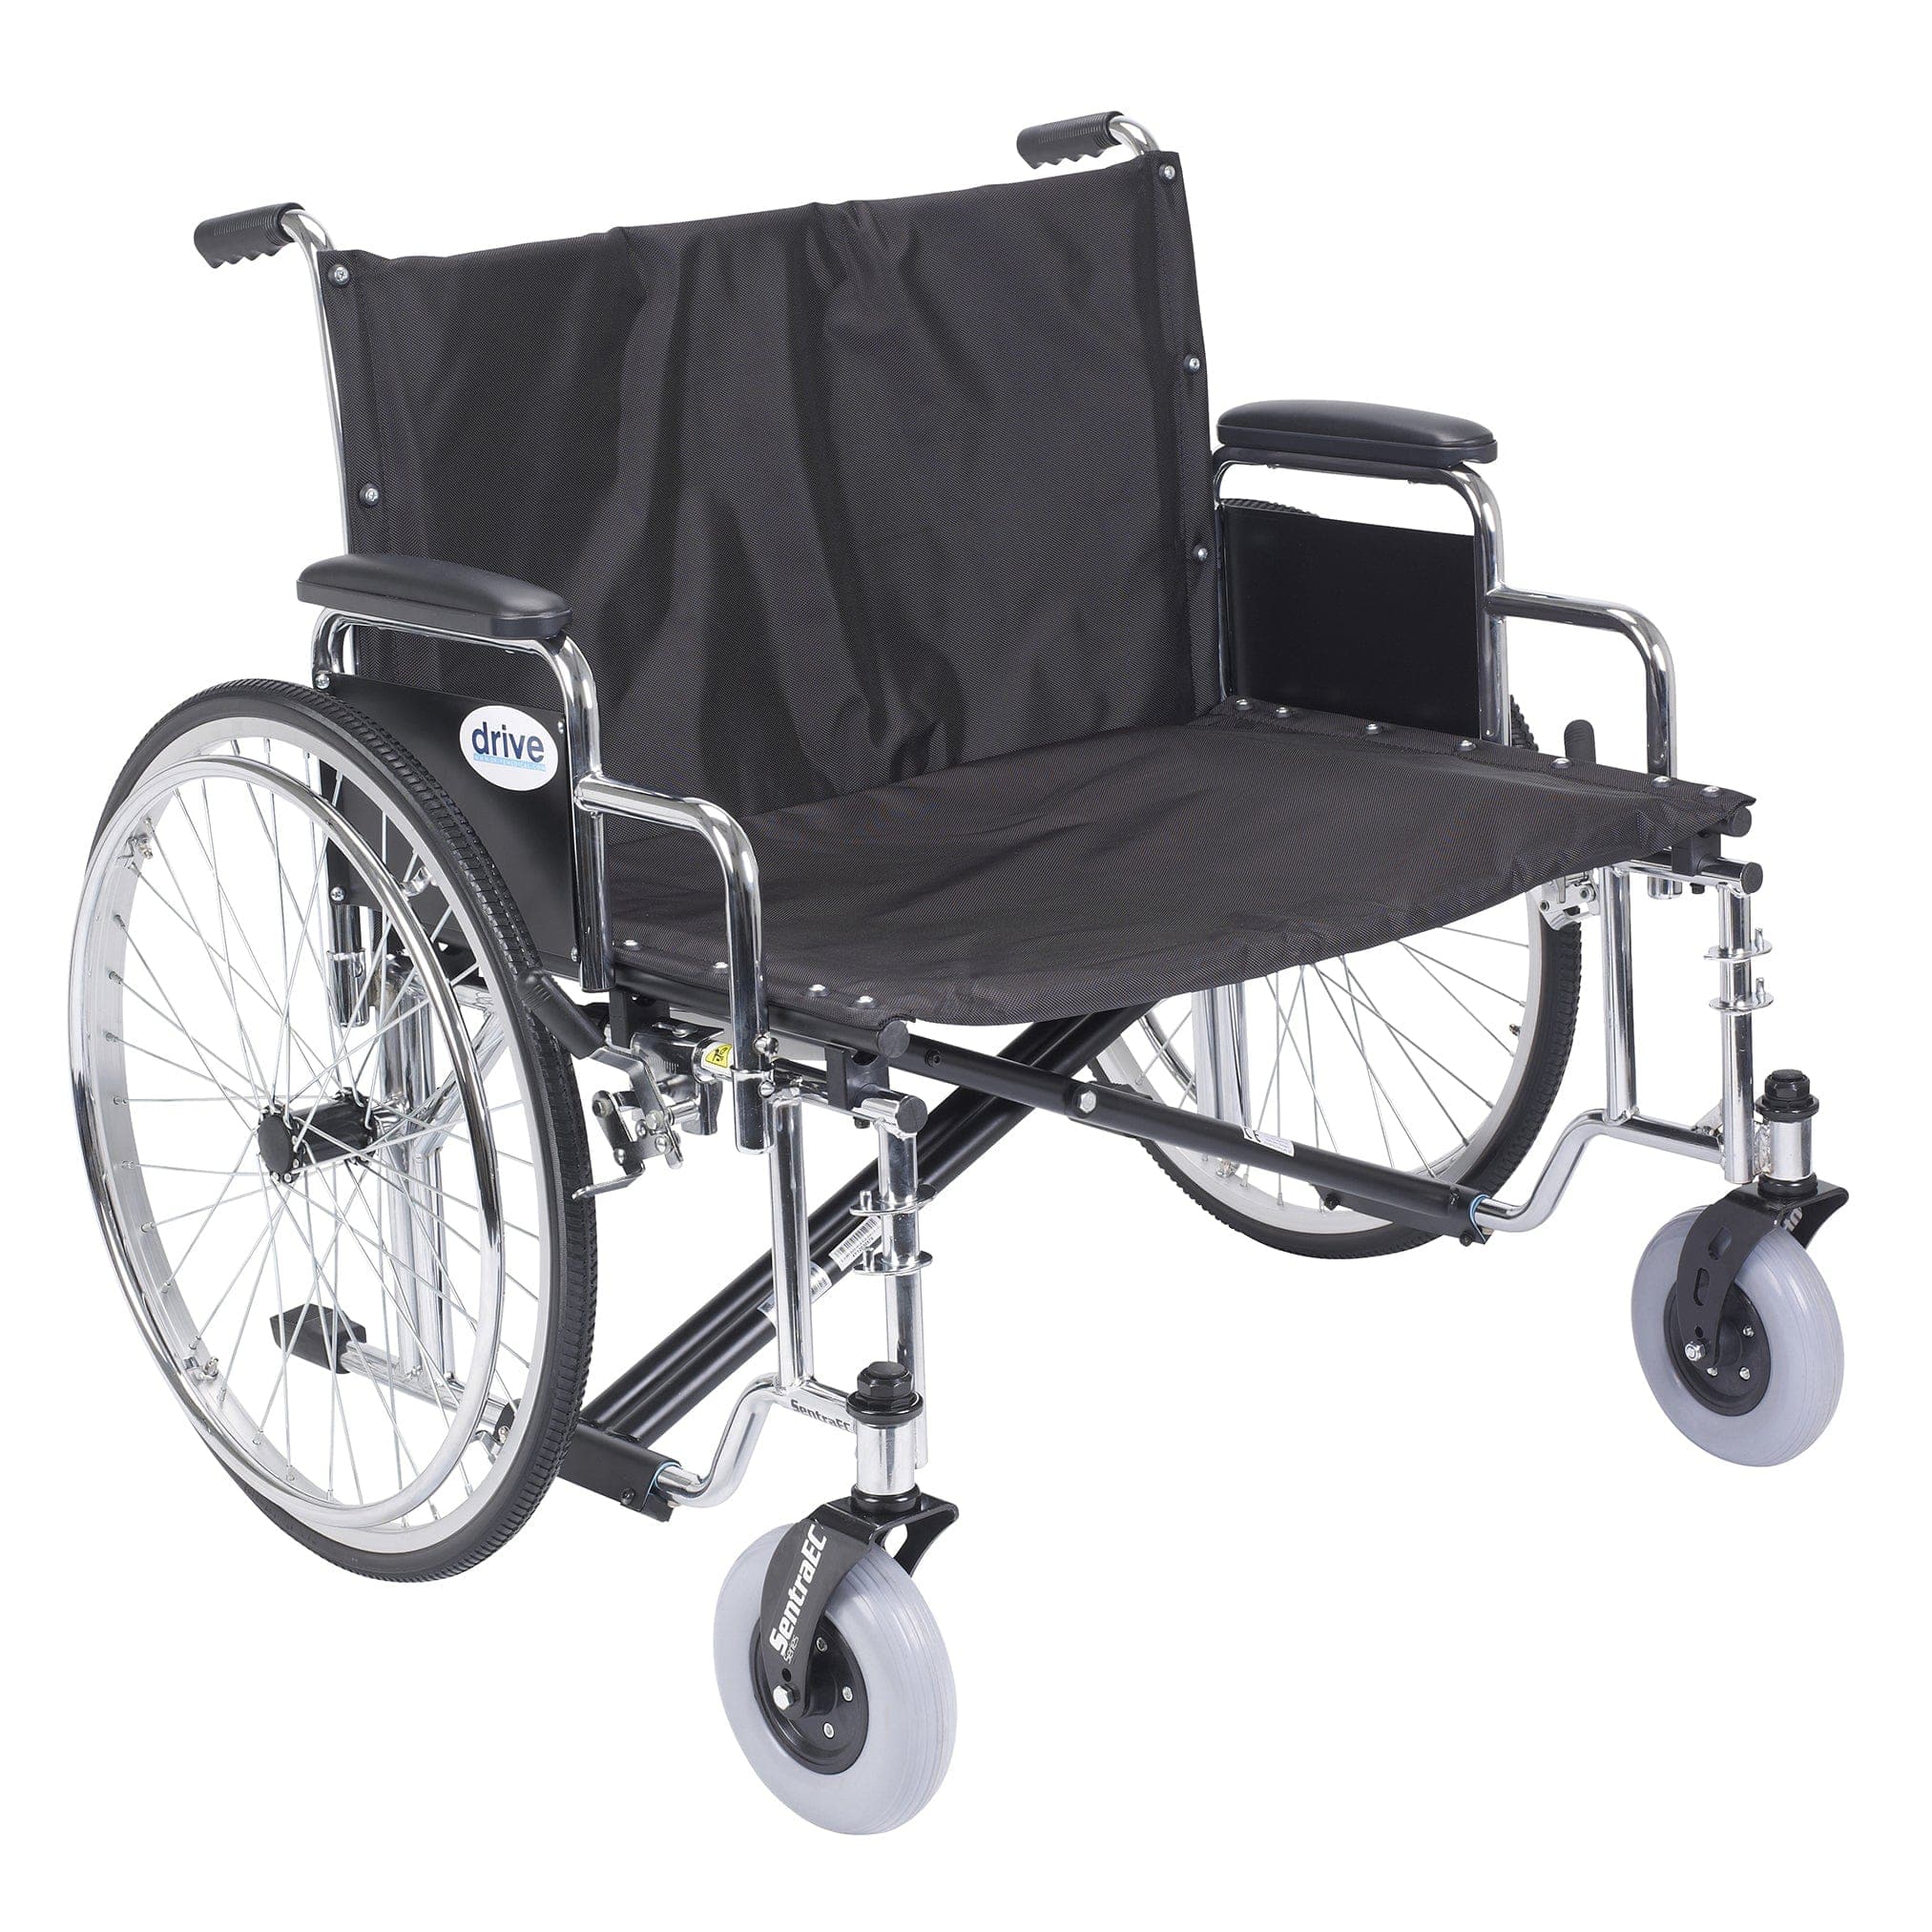 Drive Medical Wheelchairs Detachable Desk Arms / 30" Seat Drive Medical Sentra EC Heavy Duty Extra Wide Wheelchair